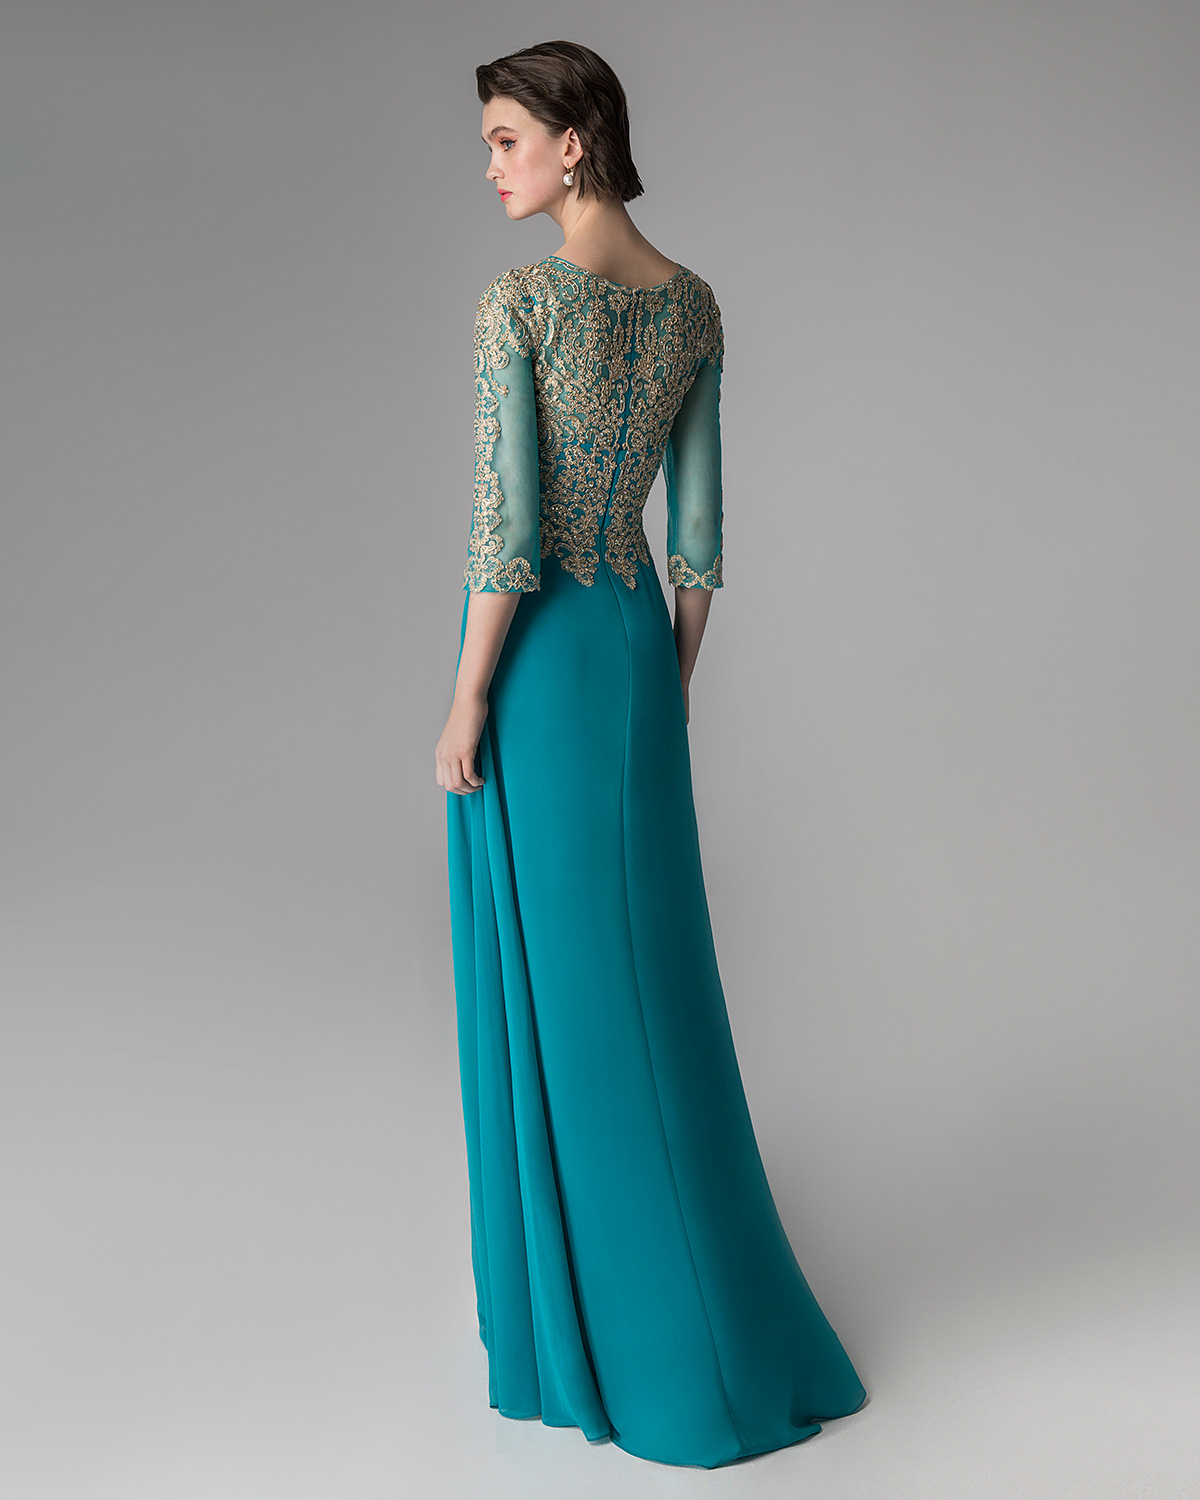 Classic Dresses / Long evening dress with beaded top and long sleeves